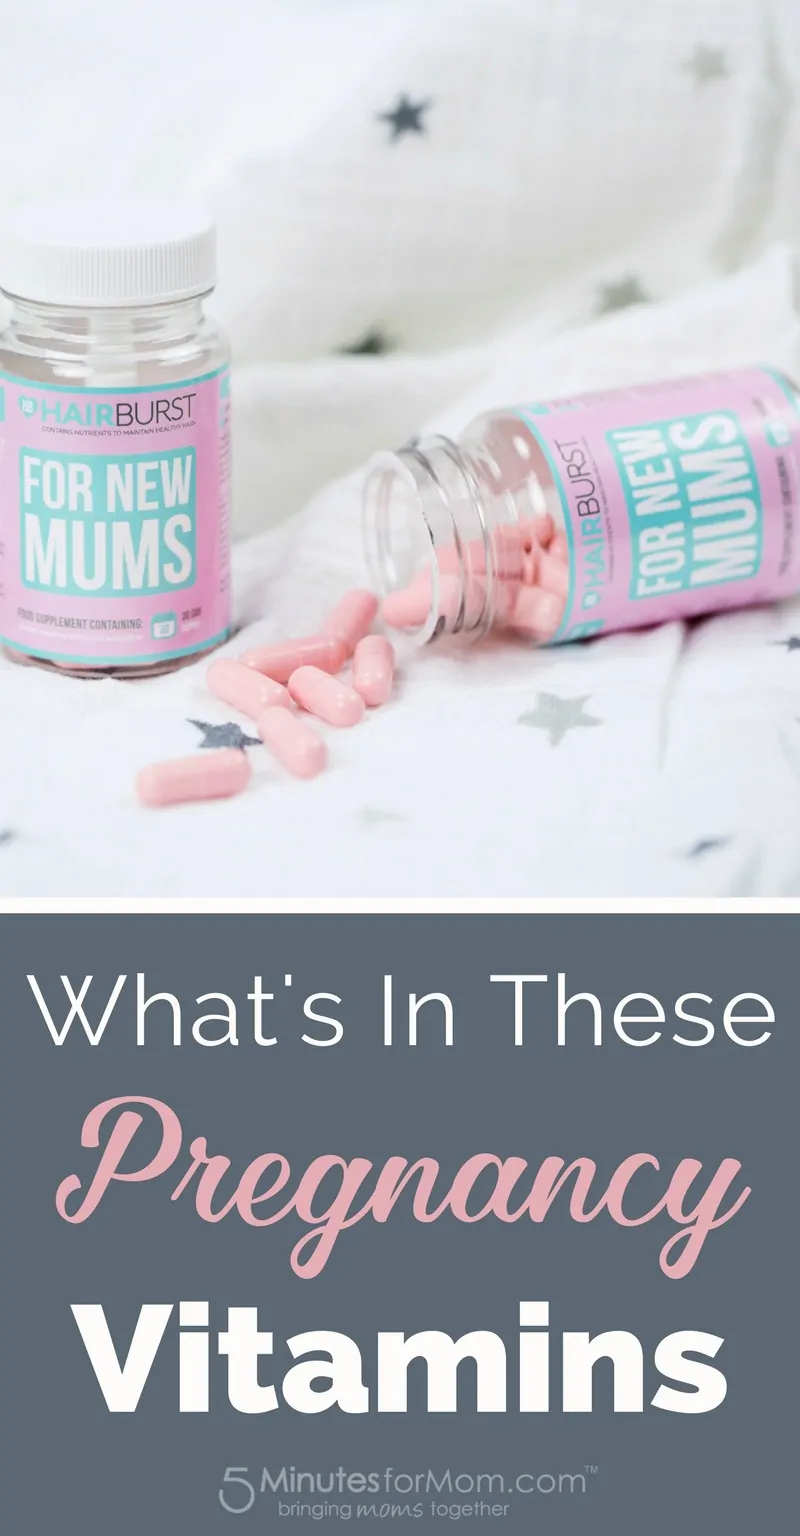 Whats in these pregnancy vitamins